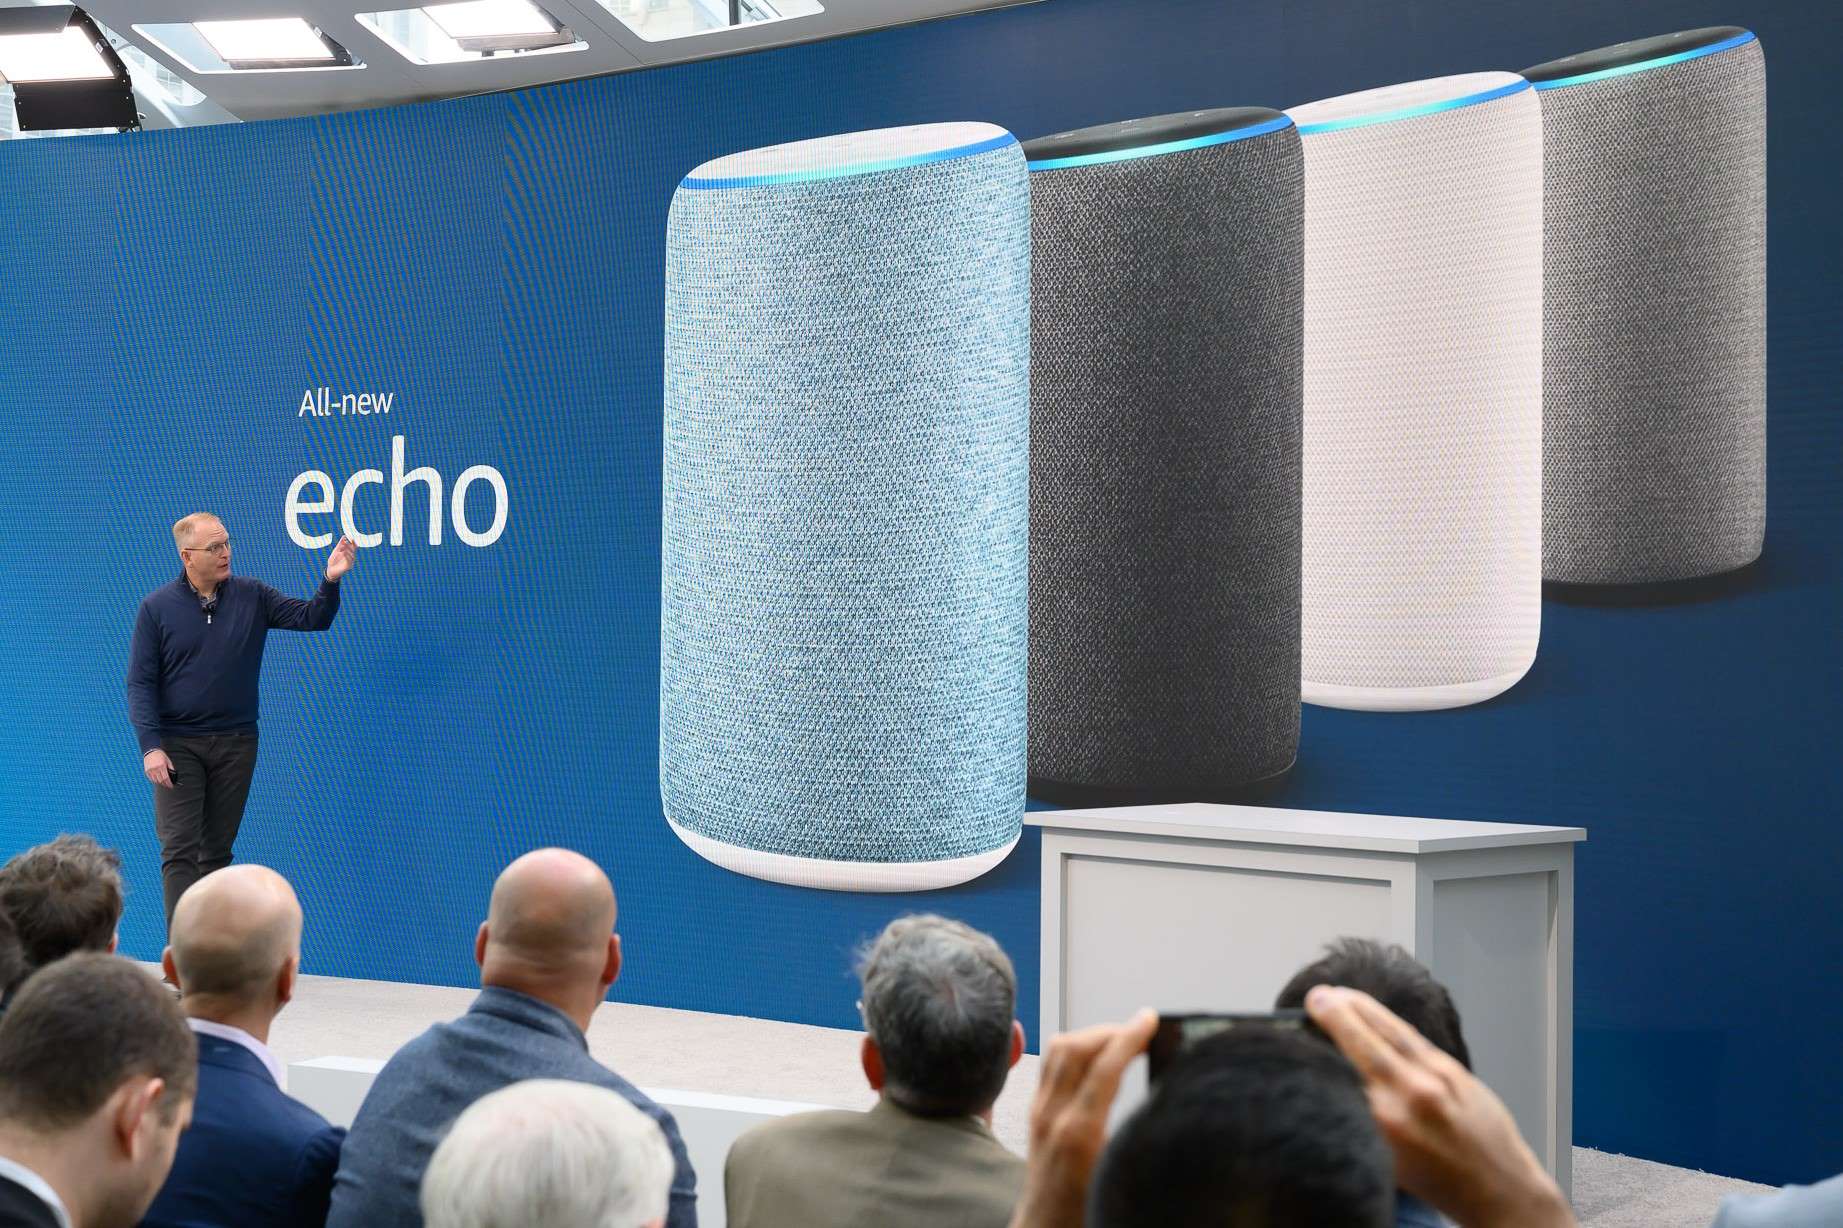 When Did The New Amazon Echo Come Out